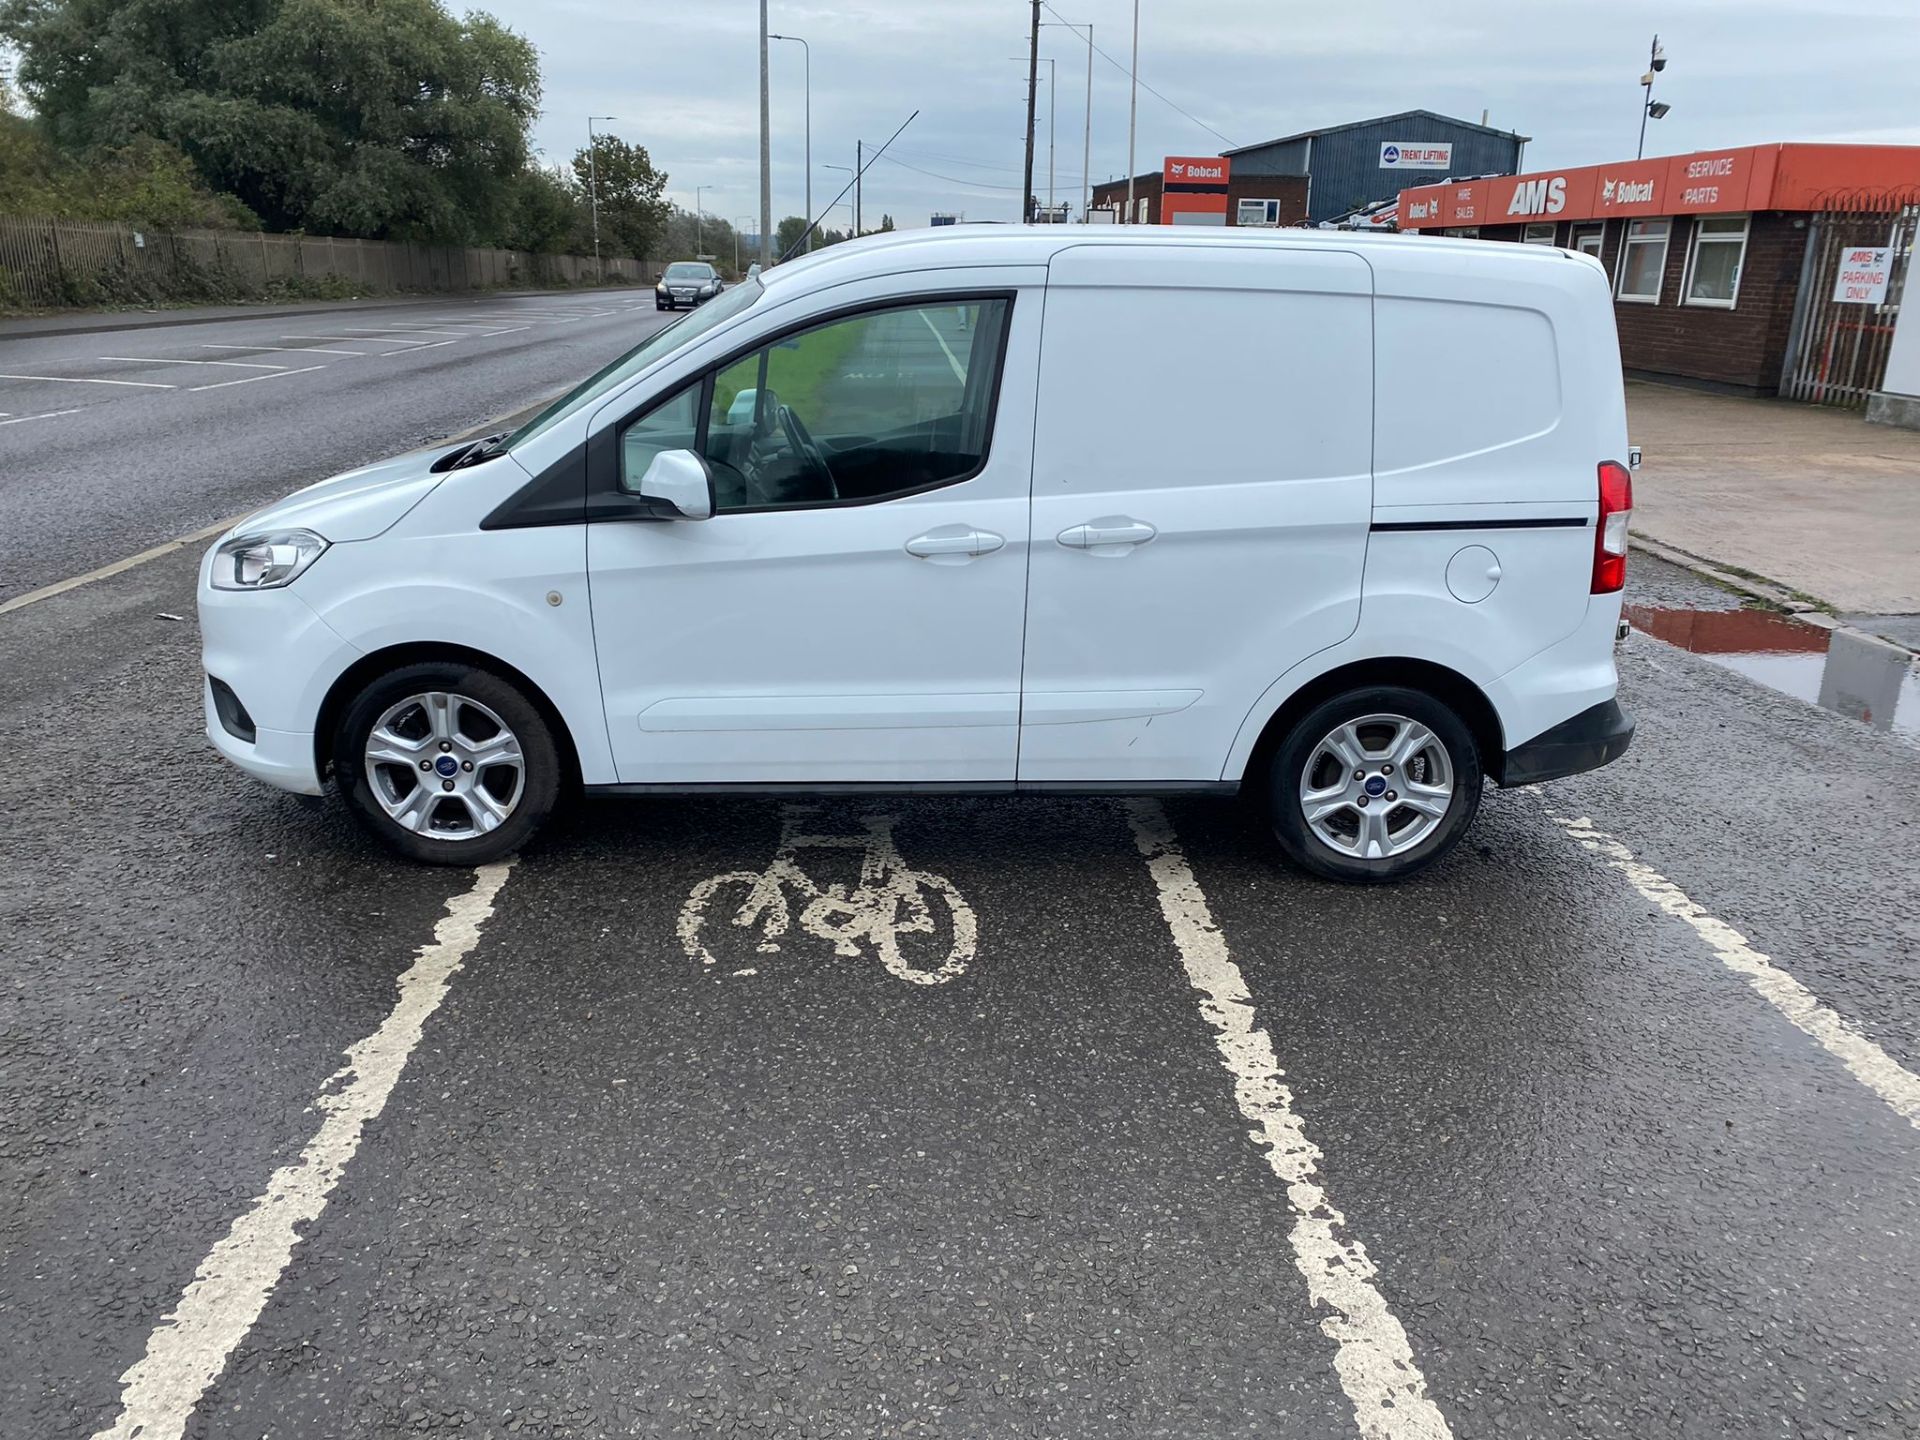 2019 19 FORD TRANSIT COURIER LIMITED PANEL VAN - ALLOY WHEELS - AIR CON - EURO 6. - Image 4 of 10